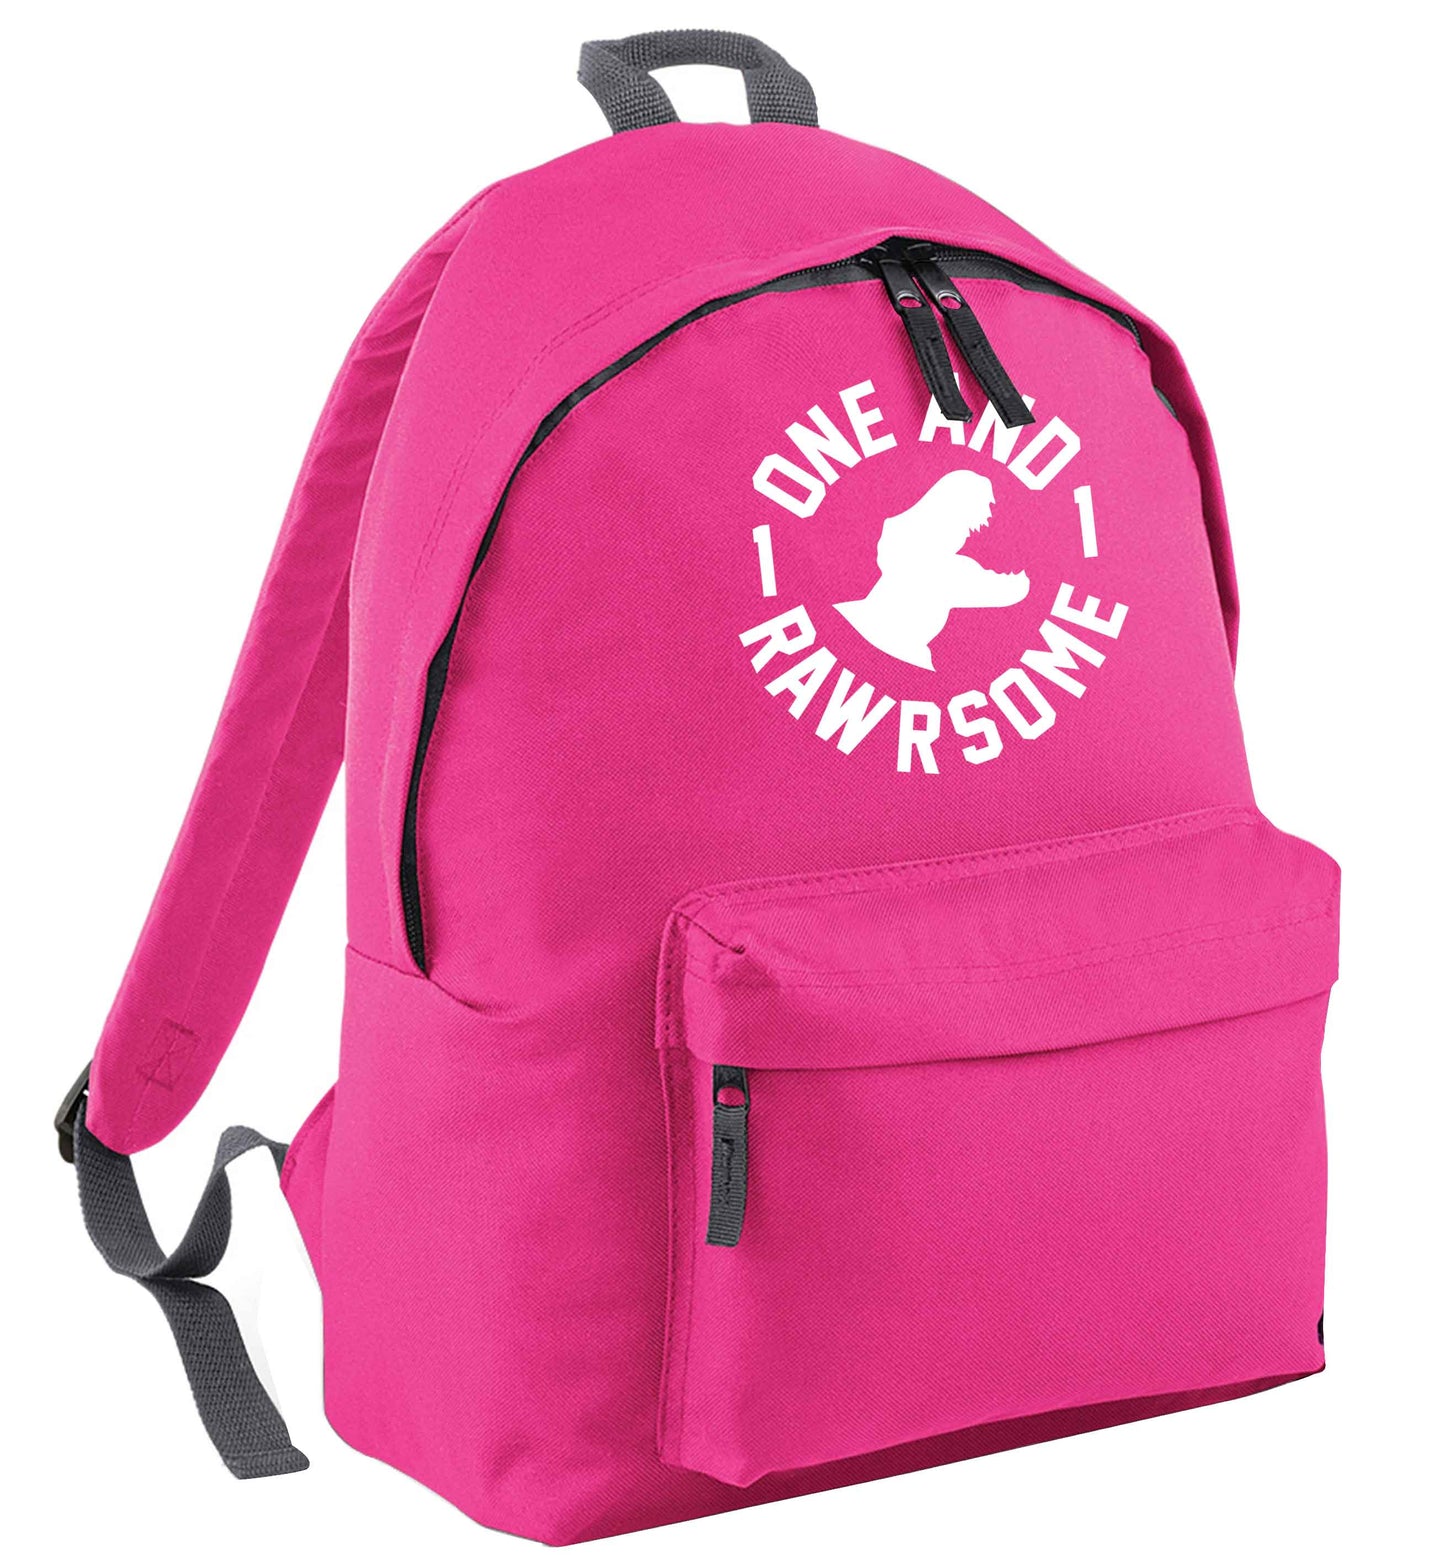 One and Rawrsome pink adults backpack